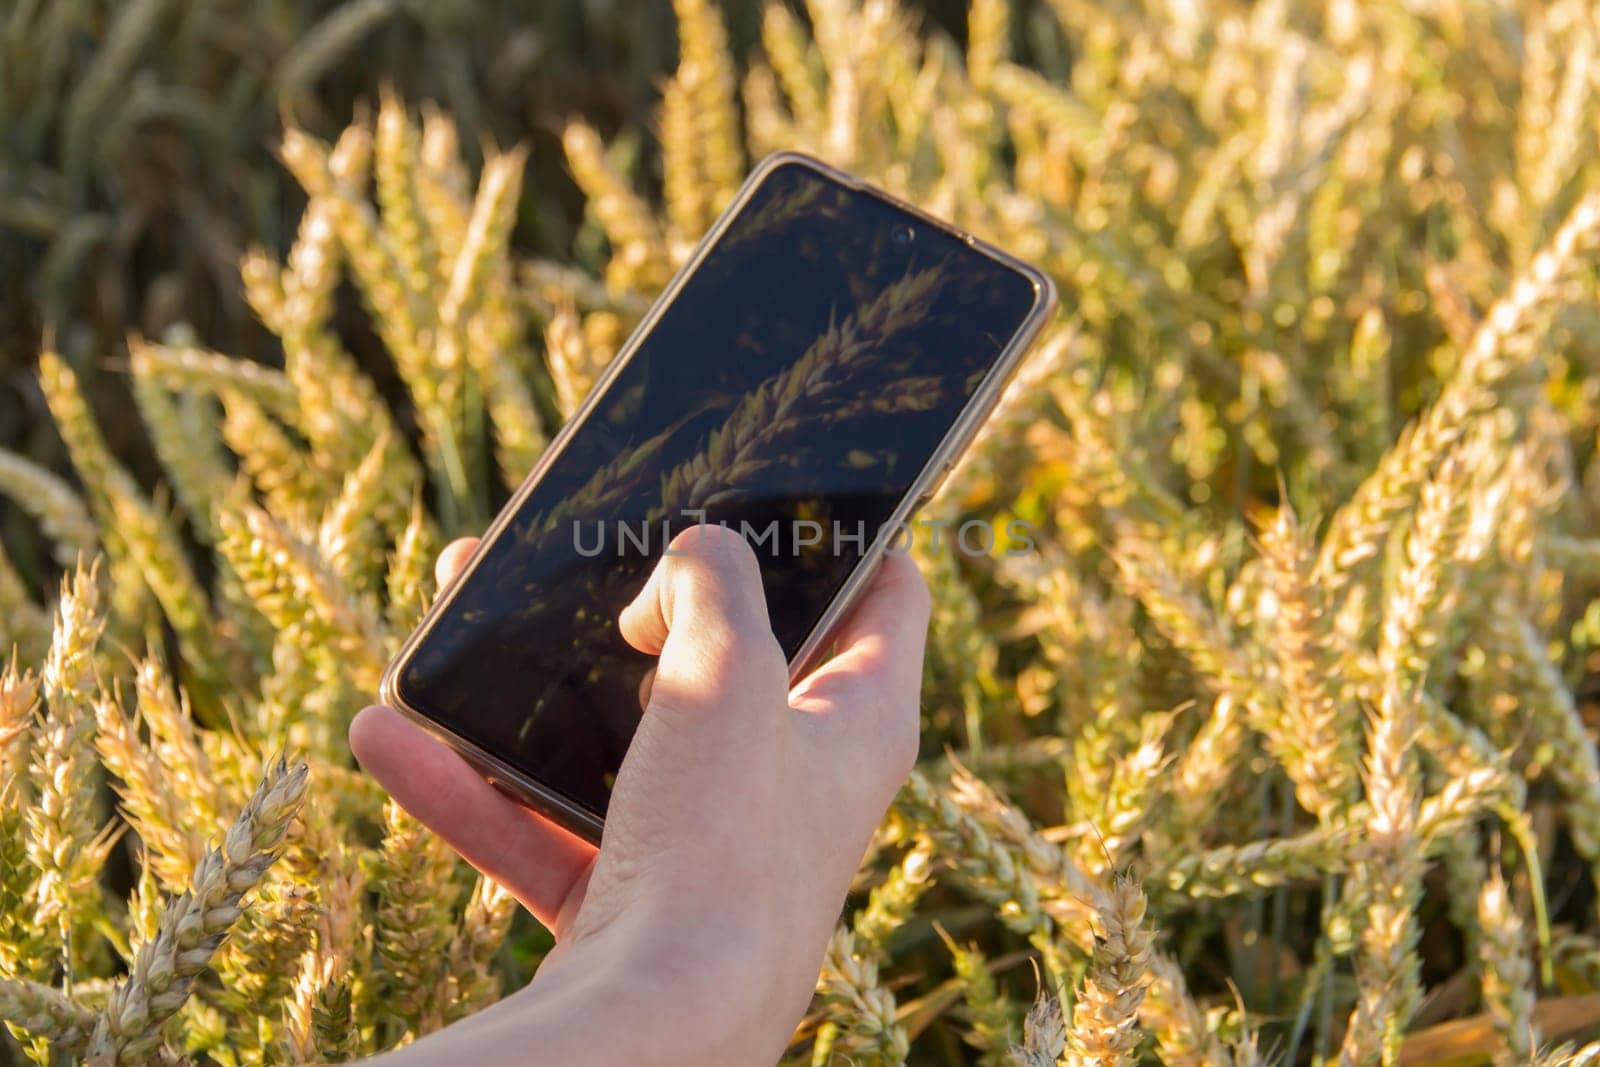 The hand of a young man with a mobile phone who is photographing an ear of wheat in a field